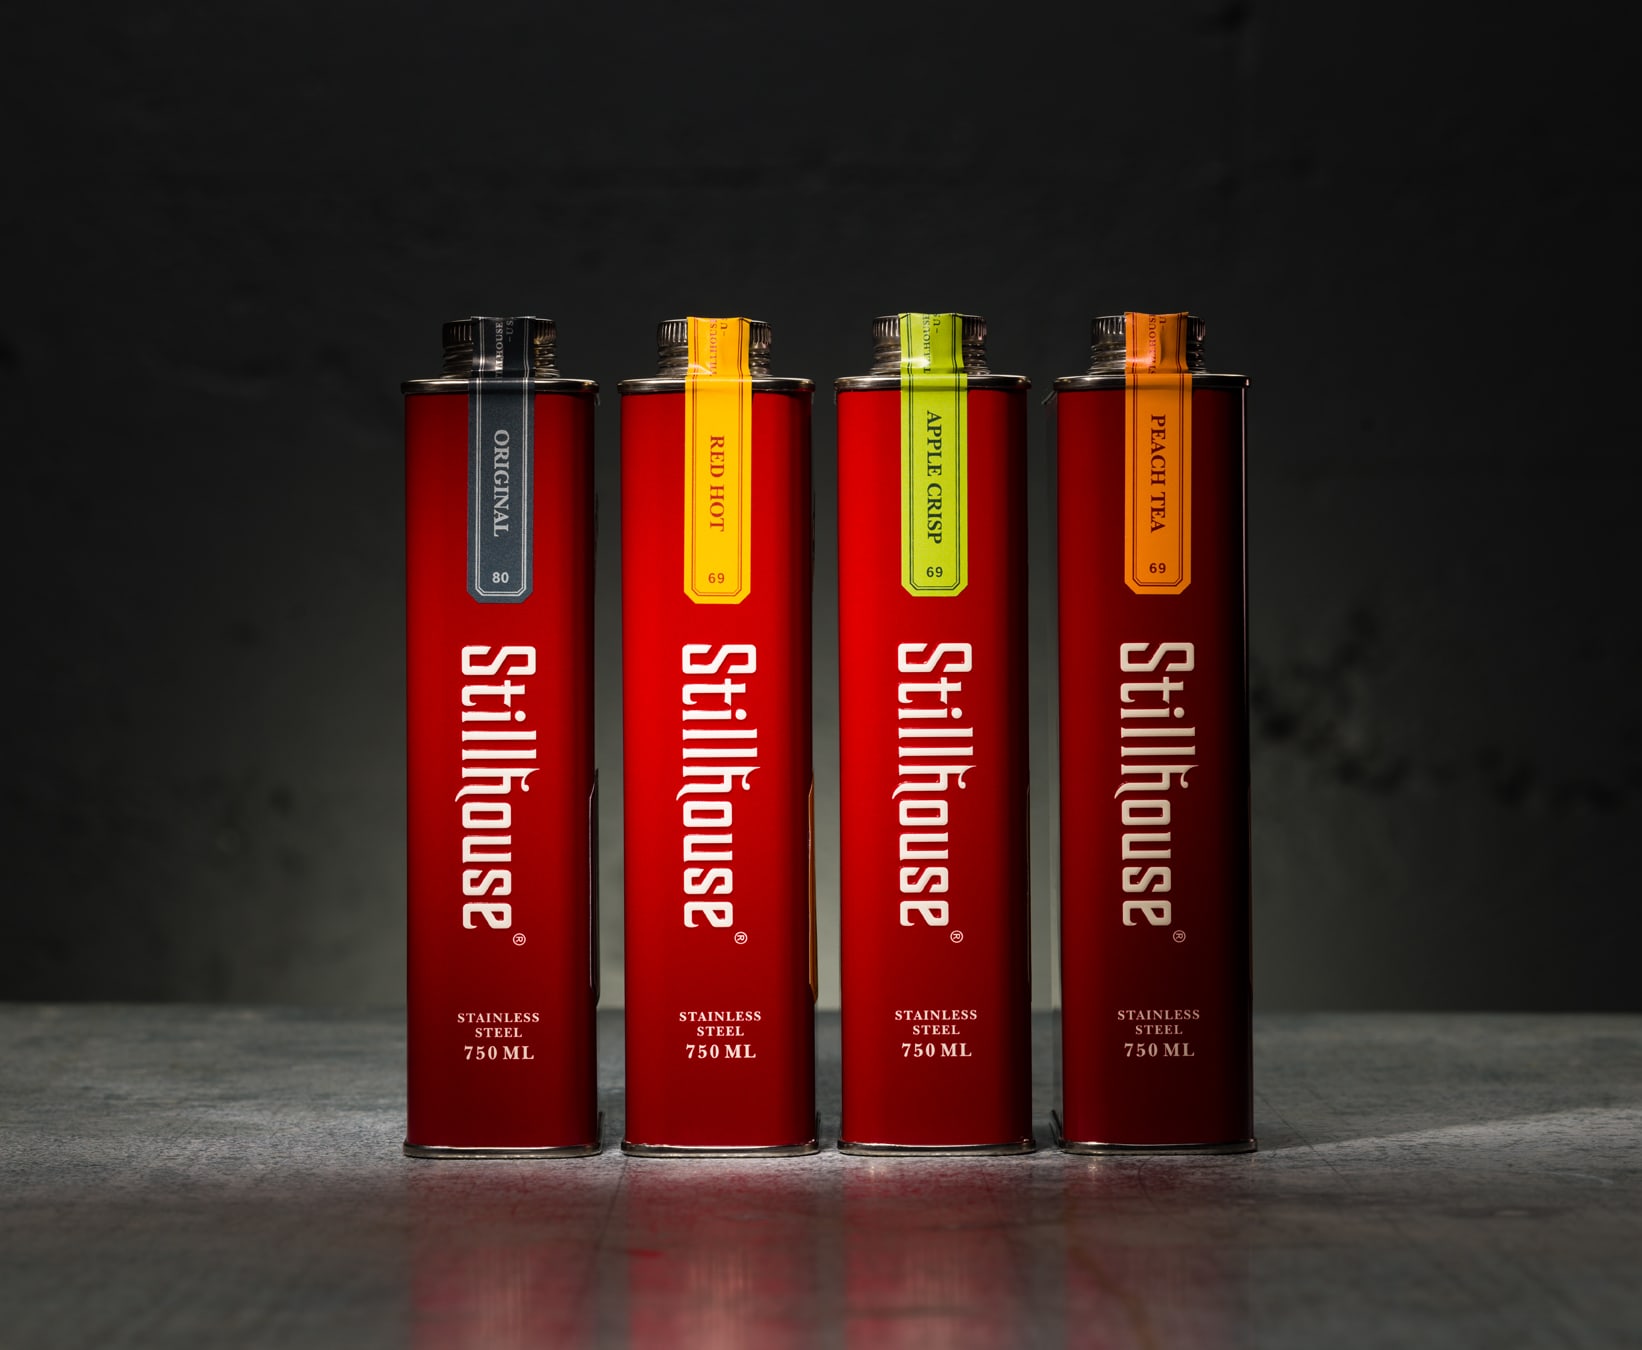 Stillhouse Moonshine whiskey packaging design steel can side view